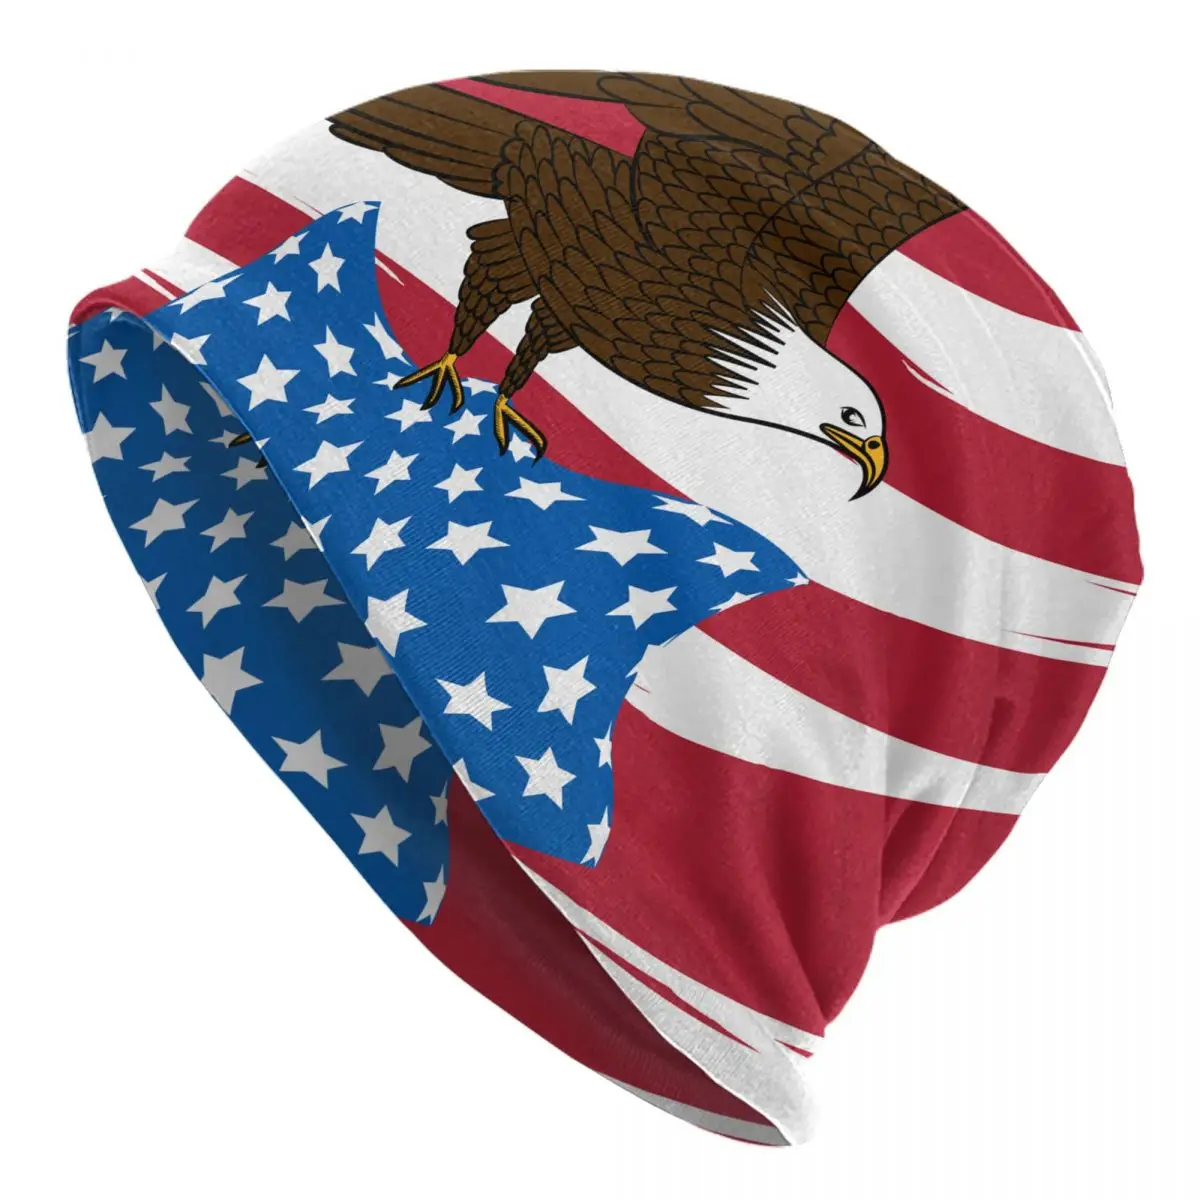 American Flag Adult Men's Women's Knit Hat Keep warm winter knitted hat